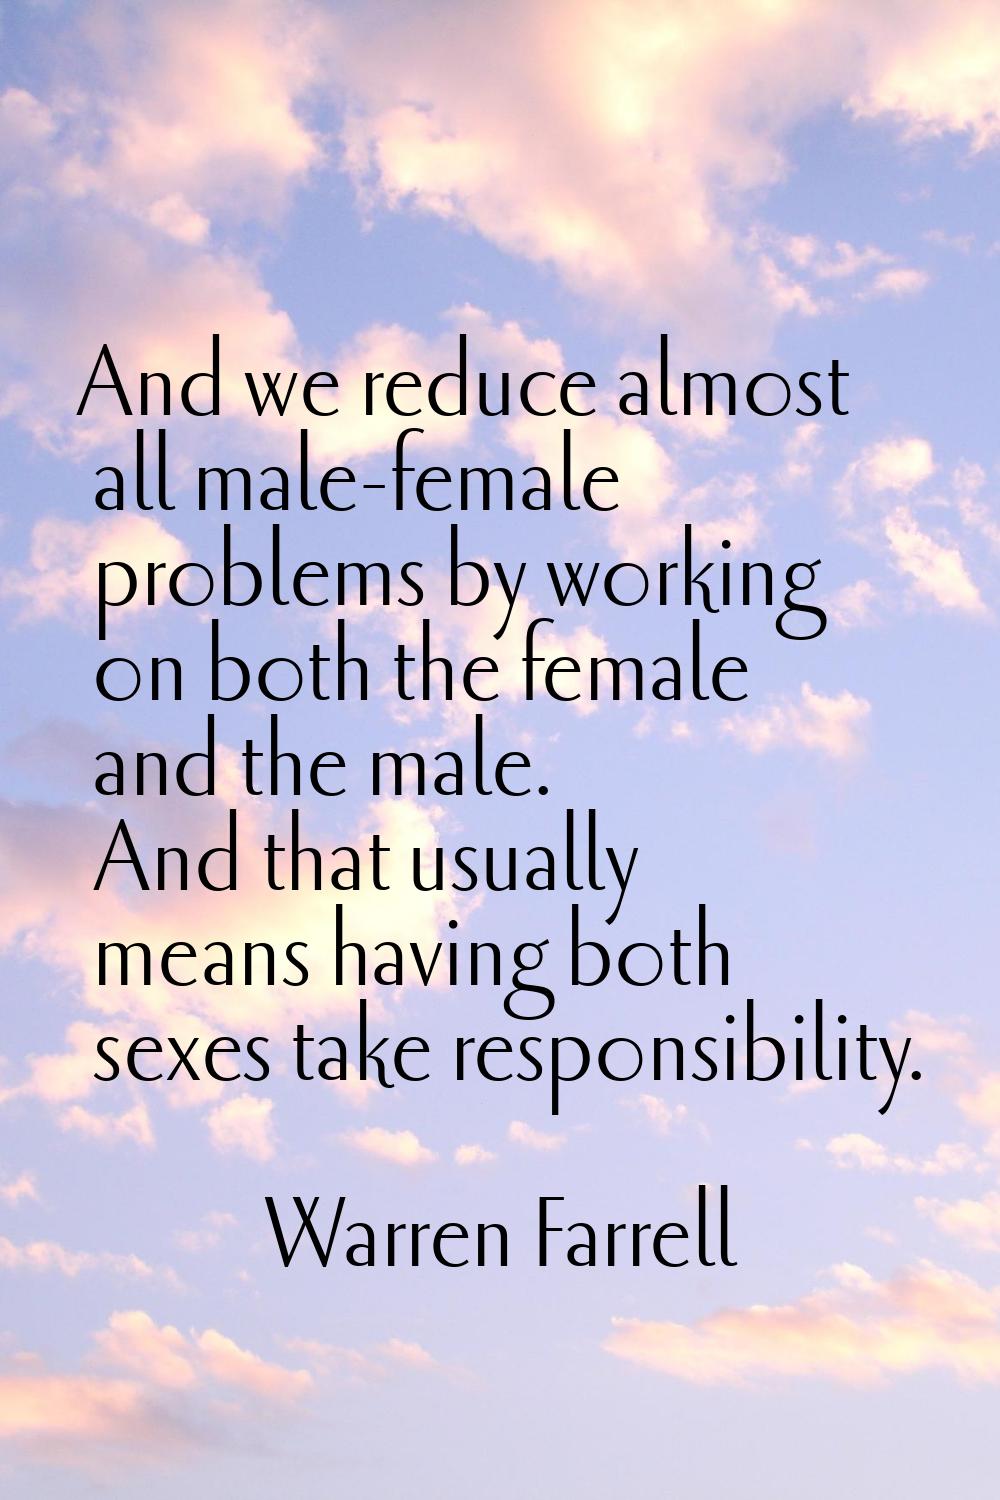 And we reduce almost all male-female problems by working on both the female and the male. And that 